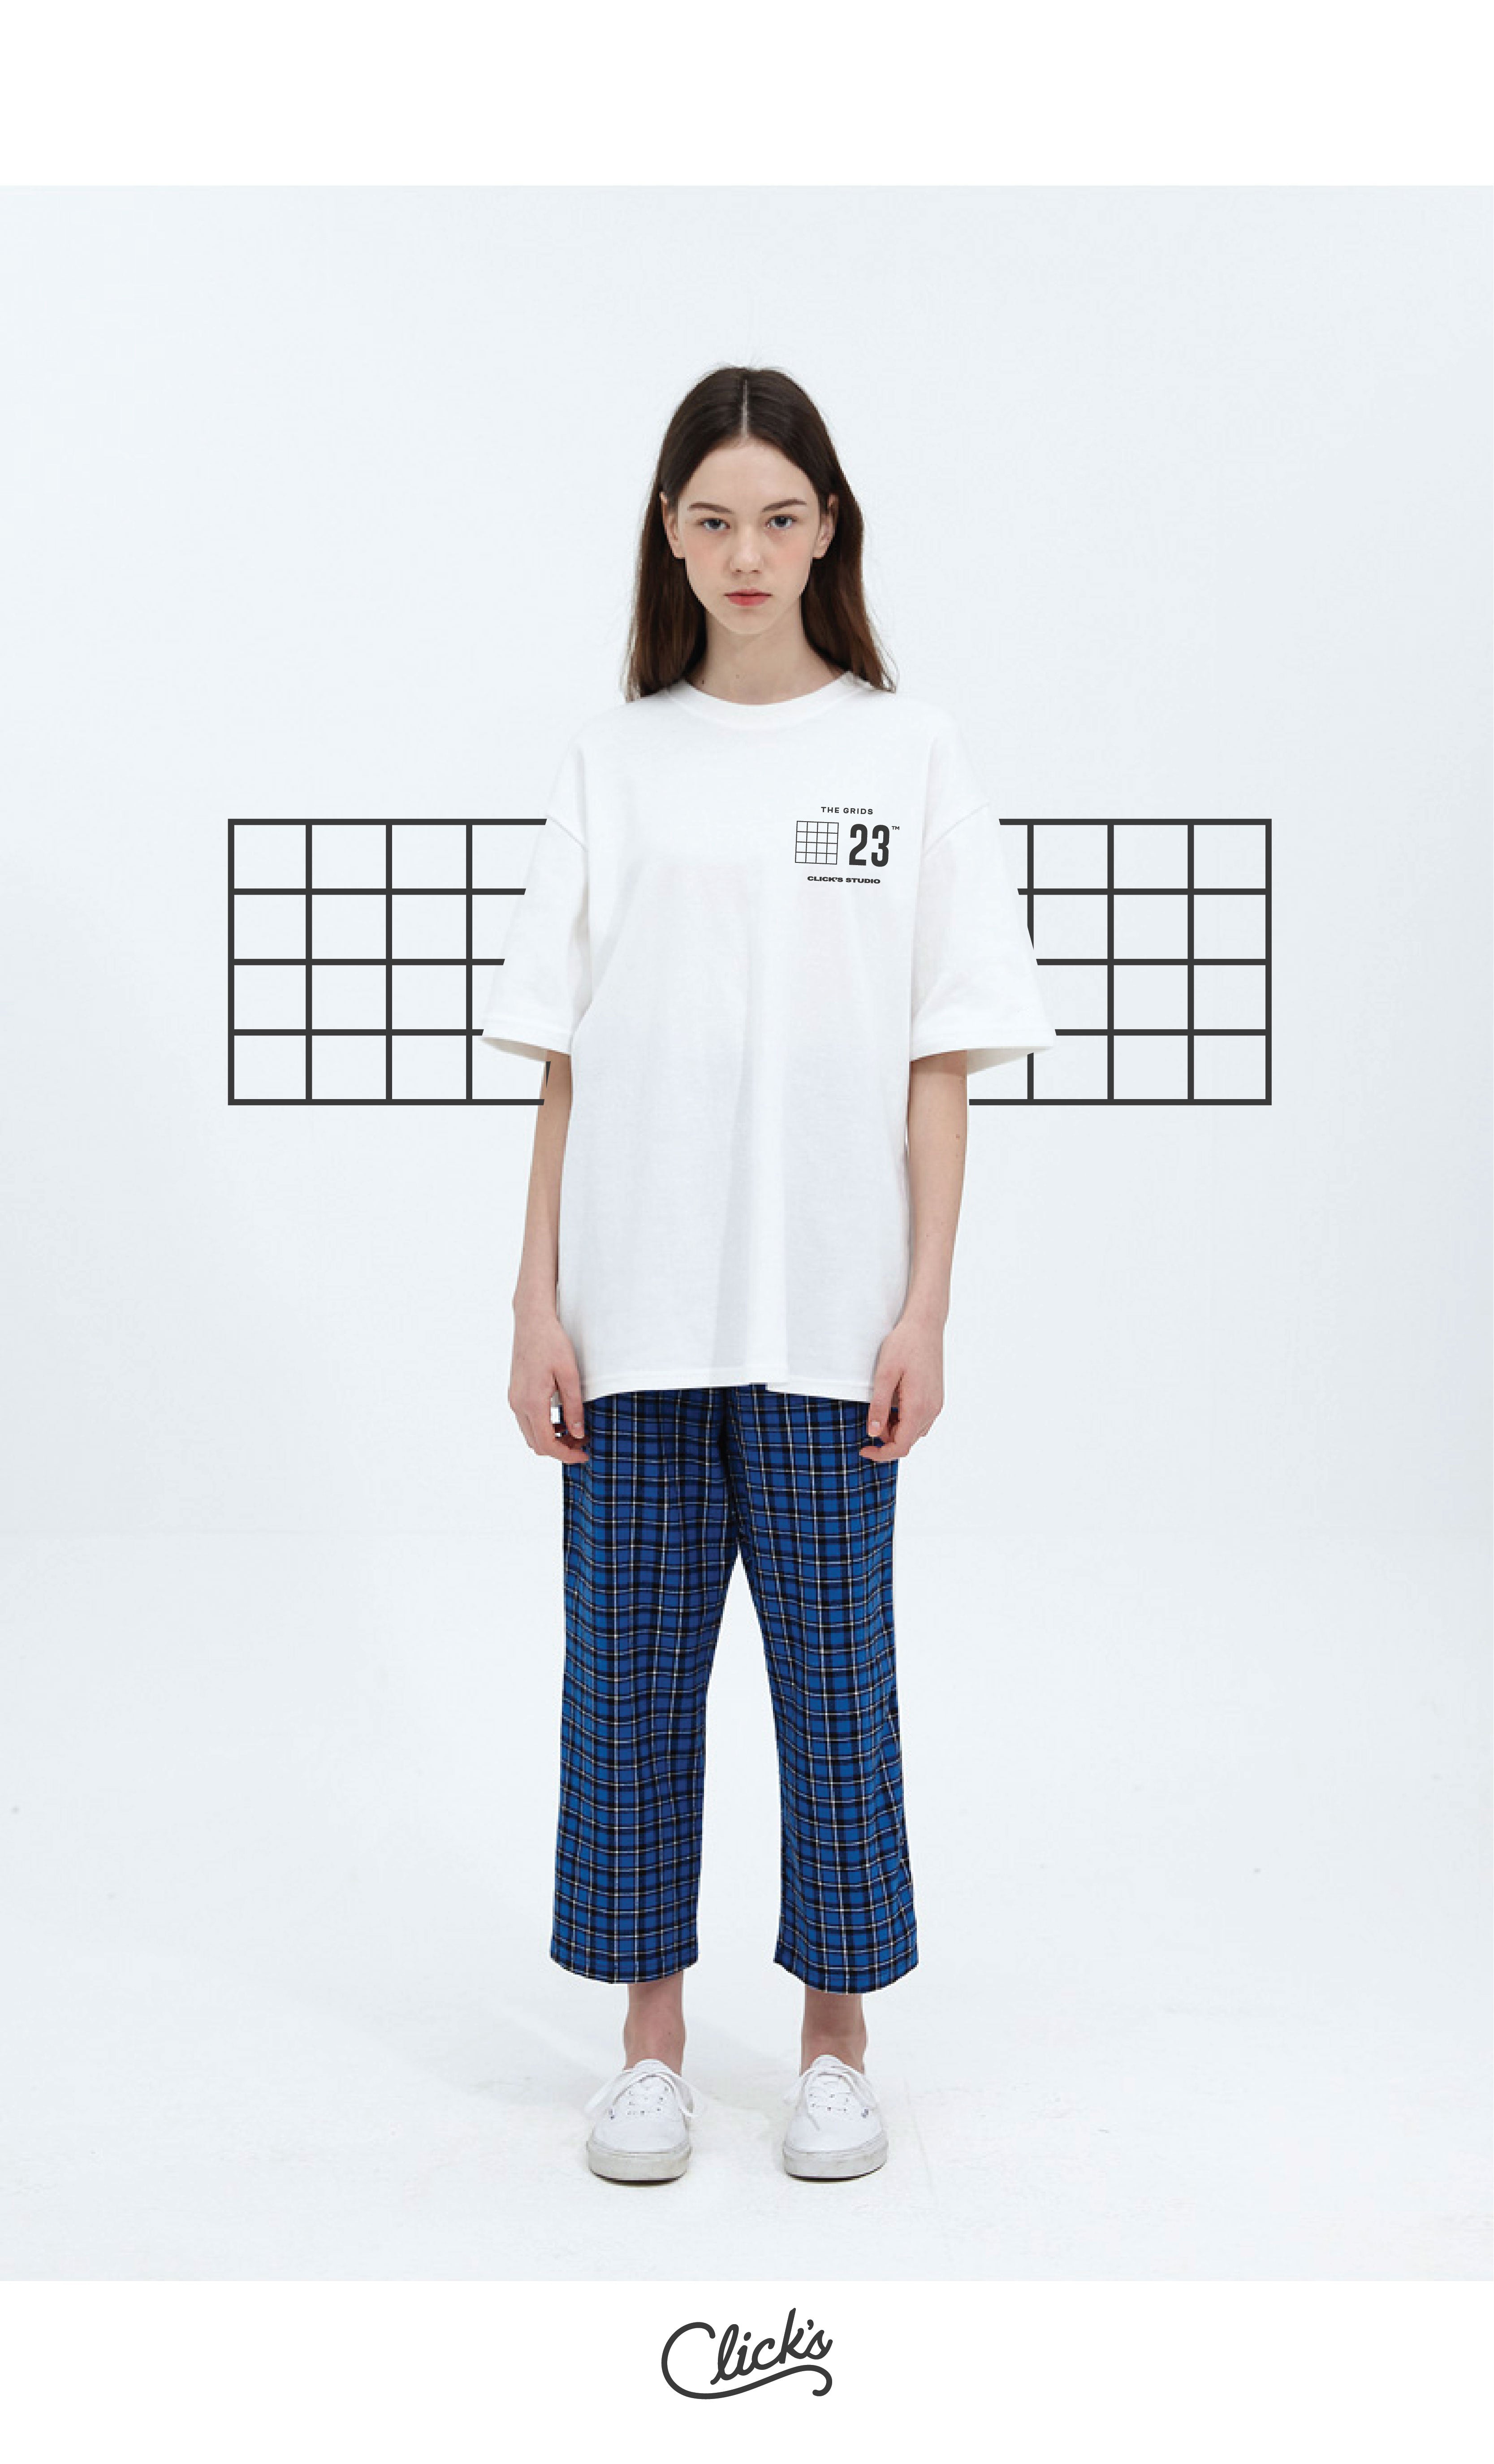 The Grids Tee by Click's